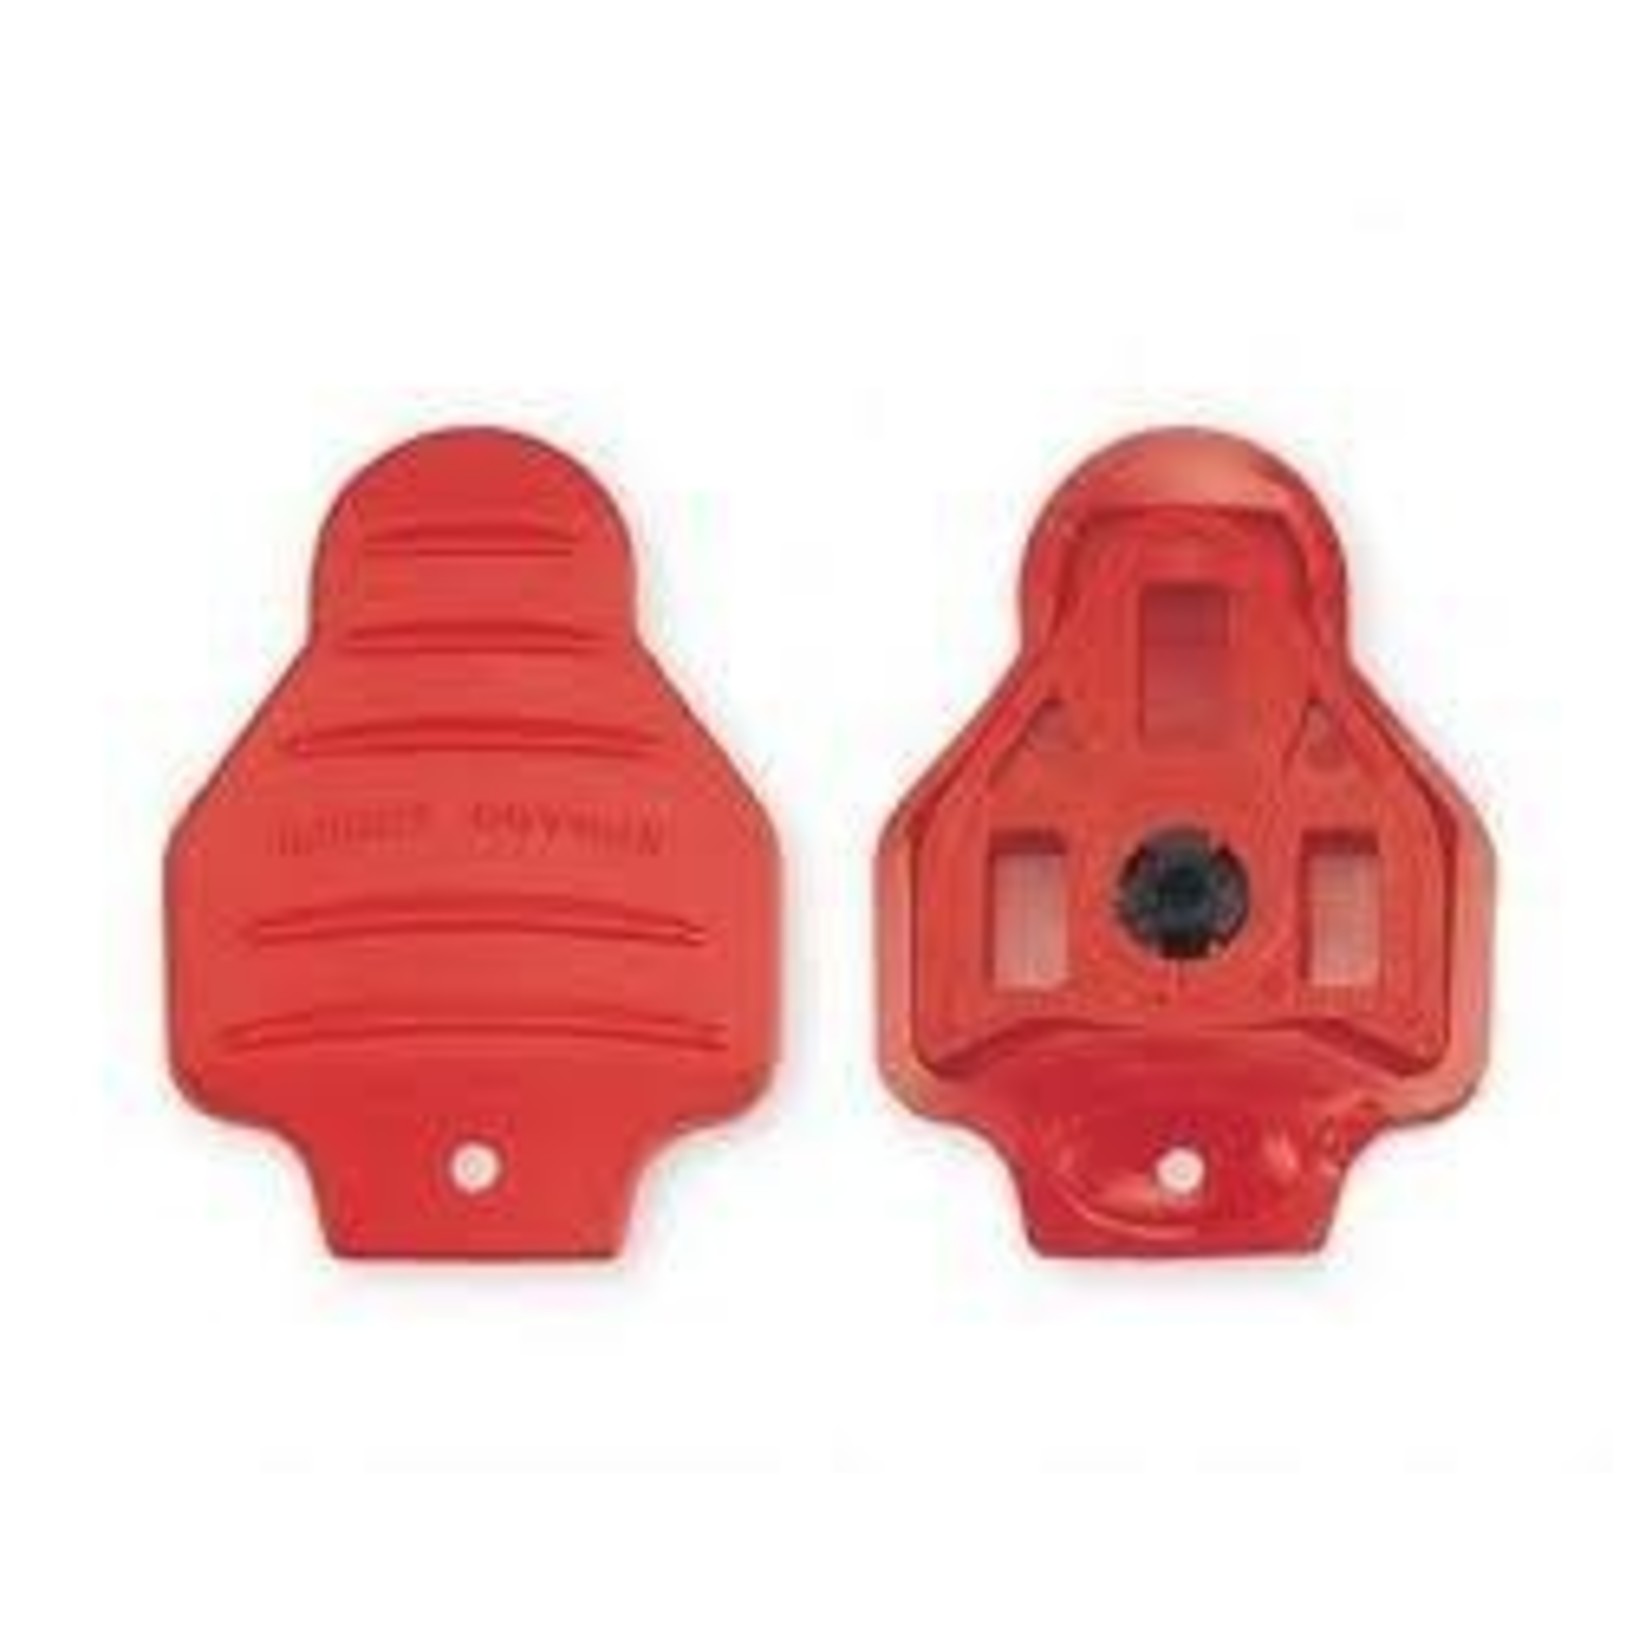 KWT KWT Bicycle EXCC Pedals Accs Cleat Covers For Look - Red